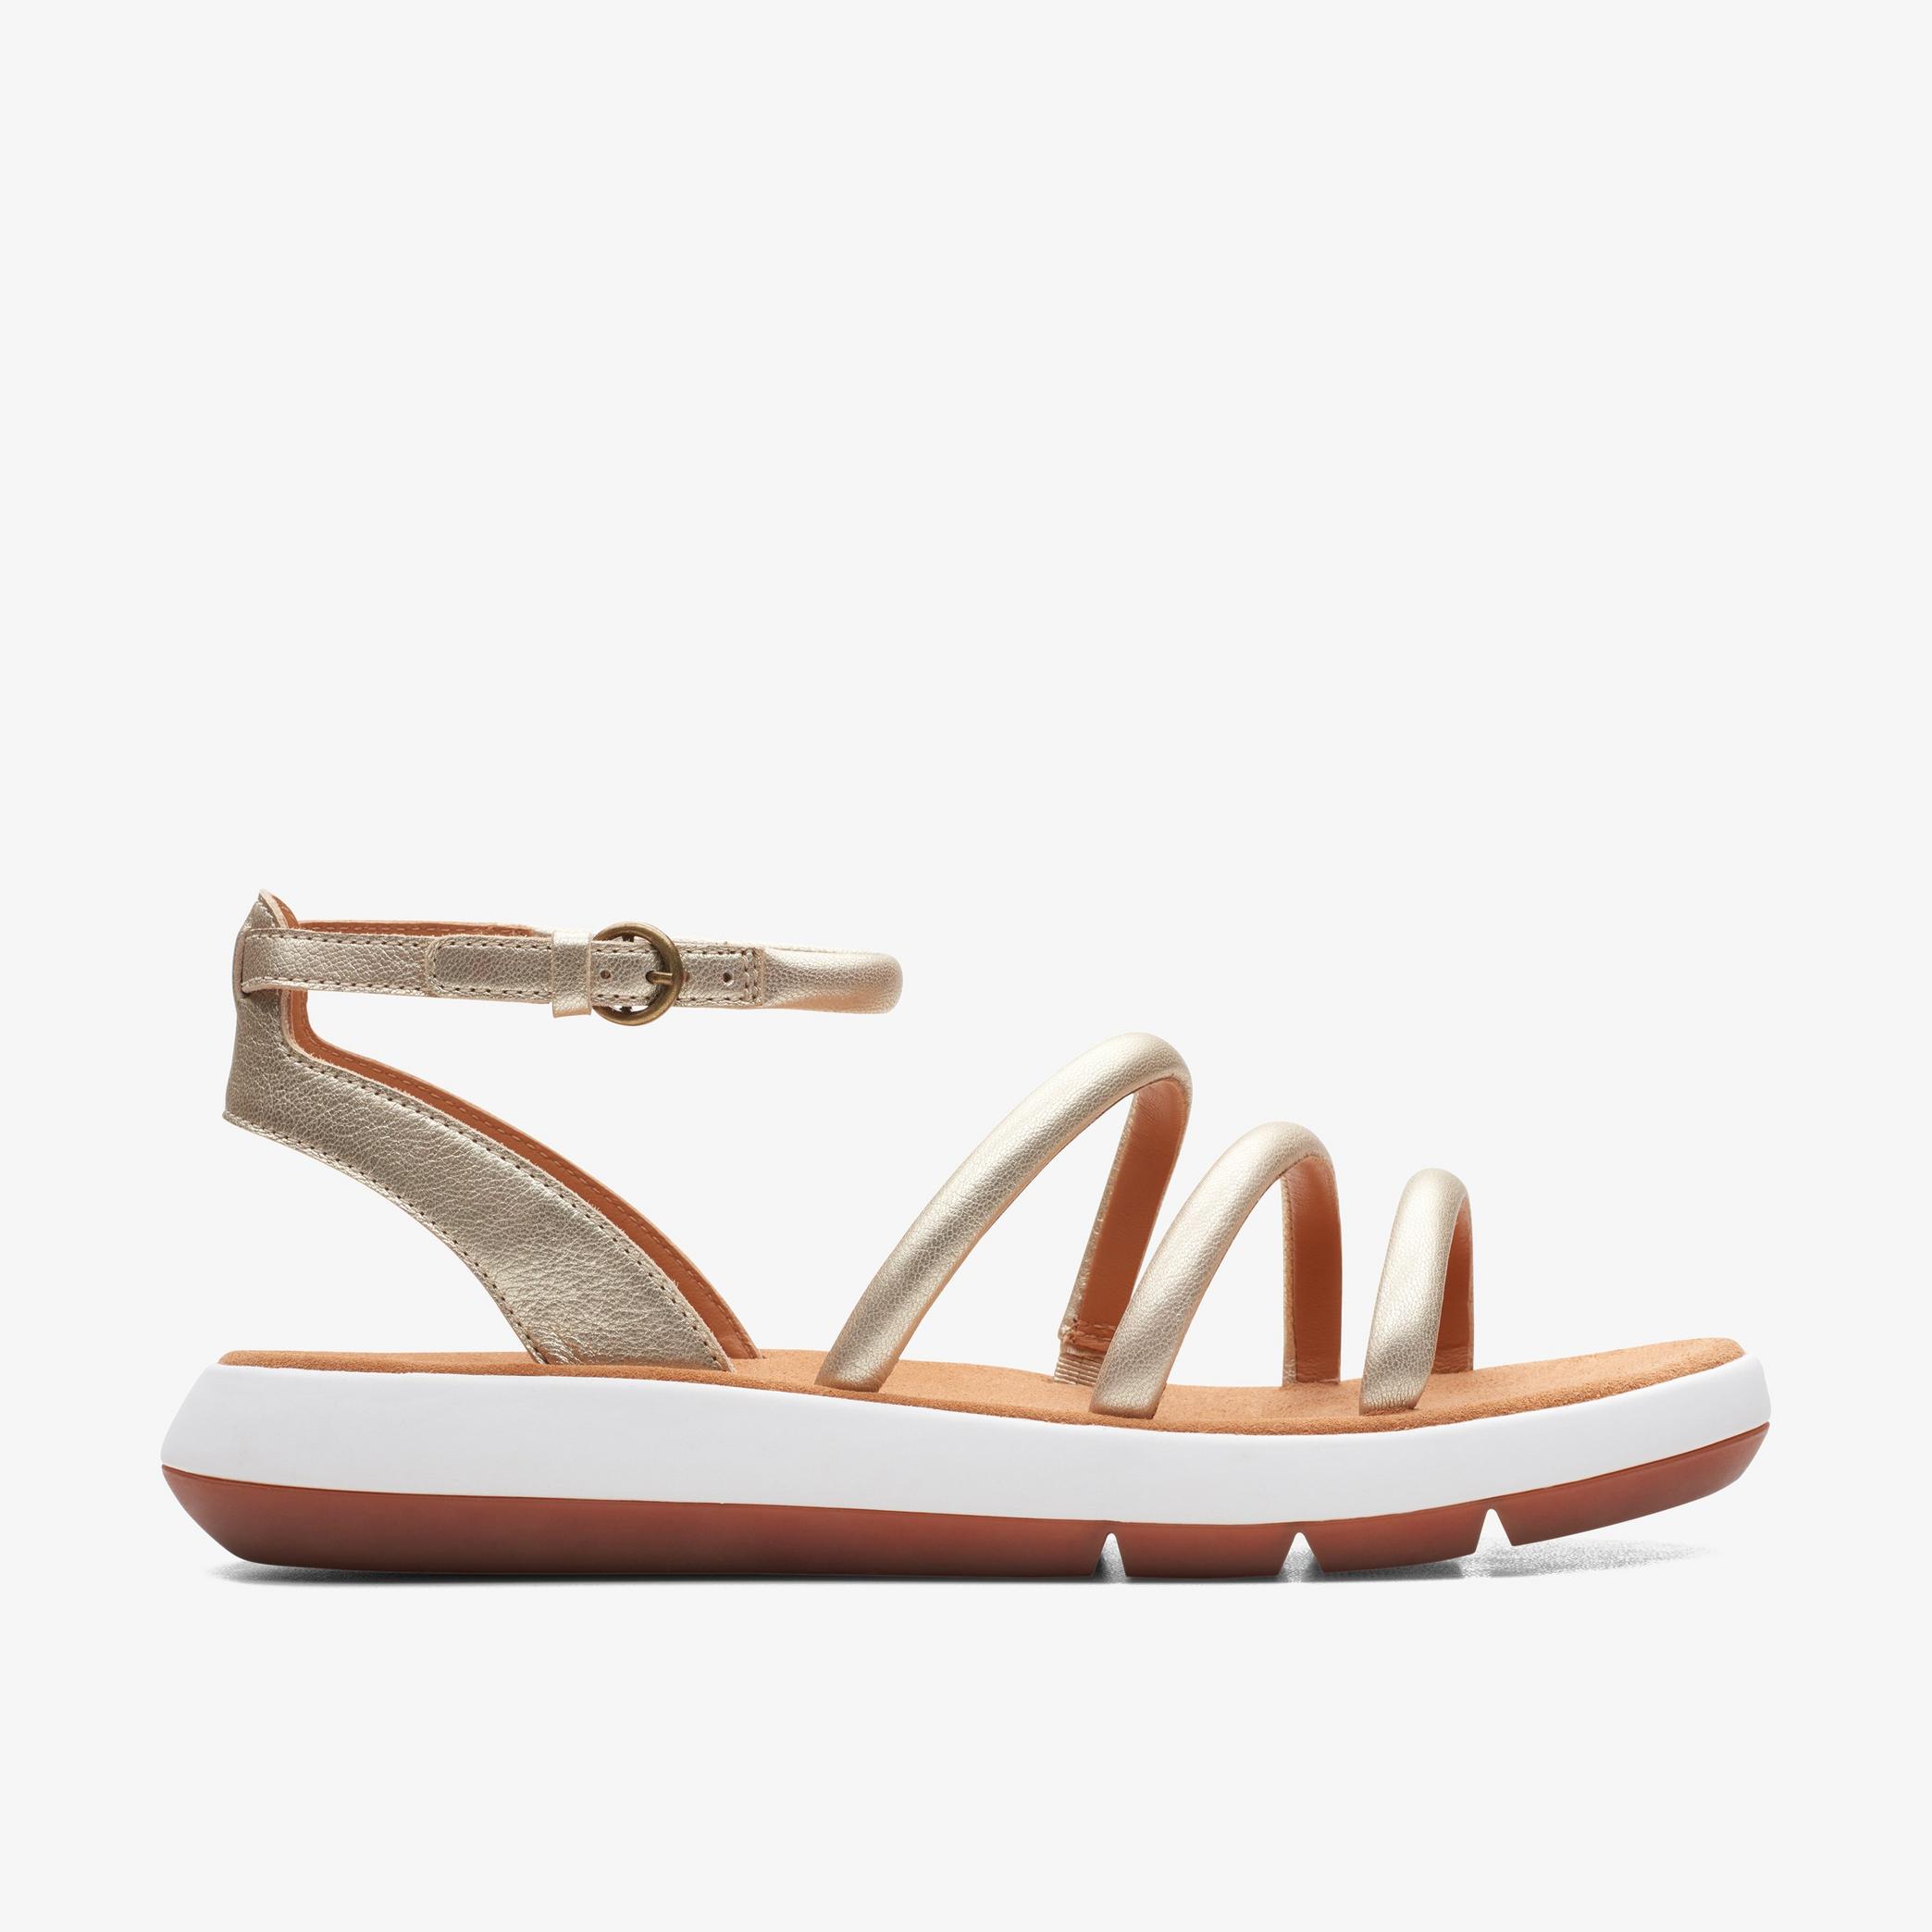 Jemsa Style Champagne Leather Flat Sandals, view 1 of 6